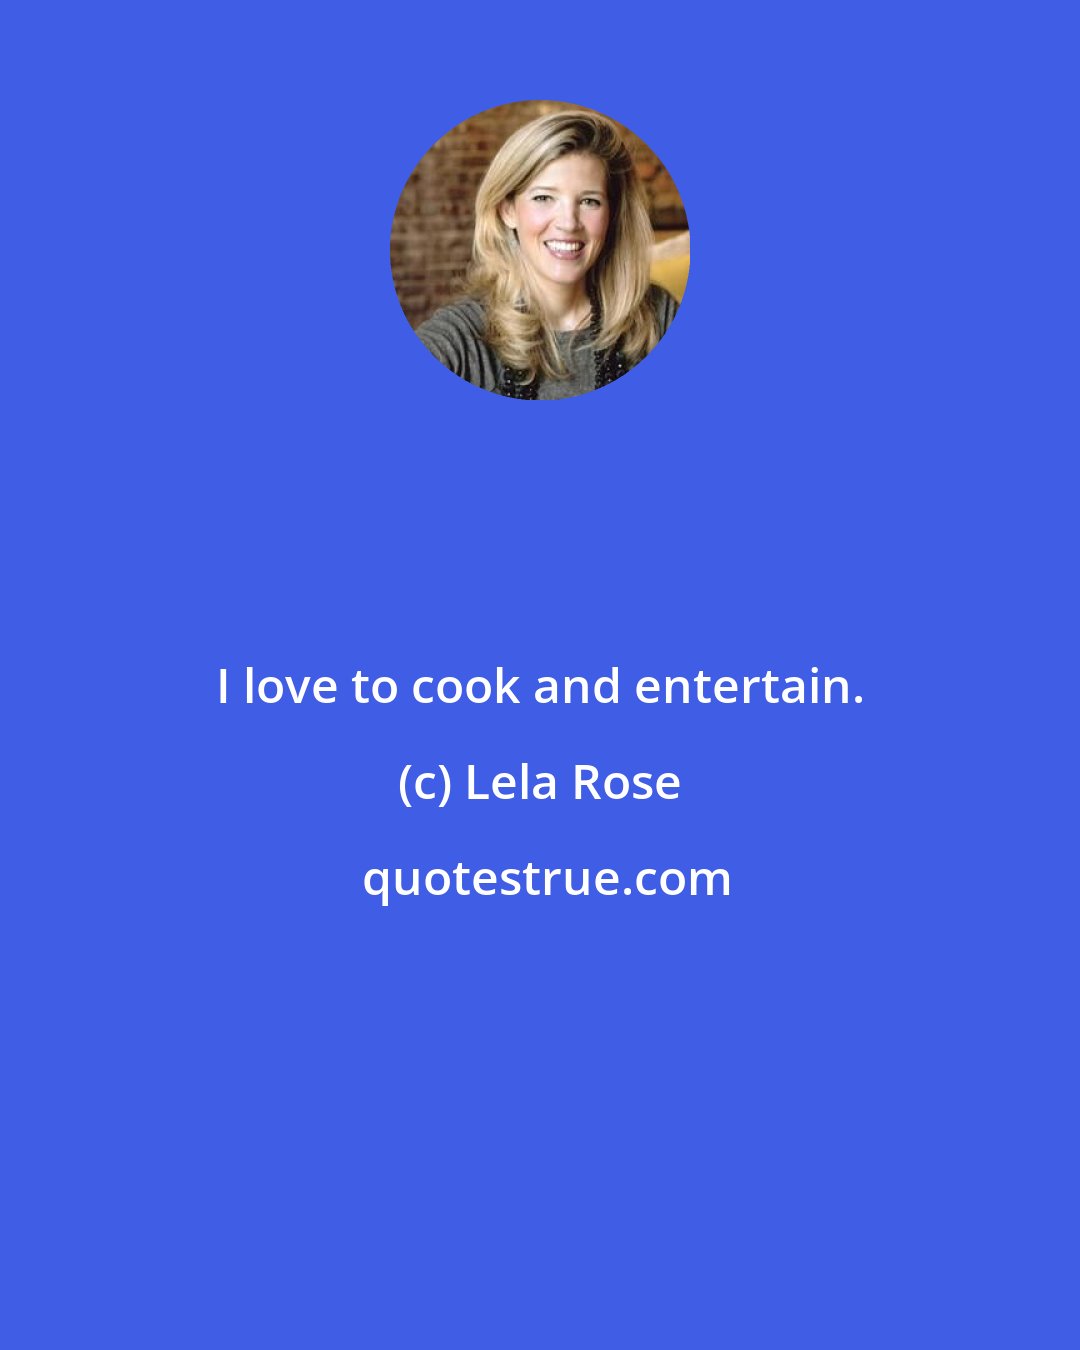 Lela Rose: I love to cook and entertain.